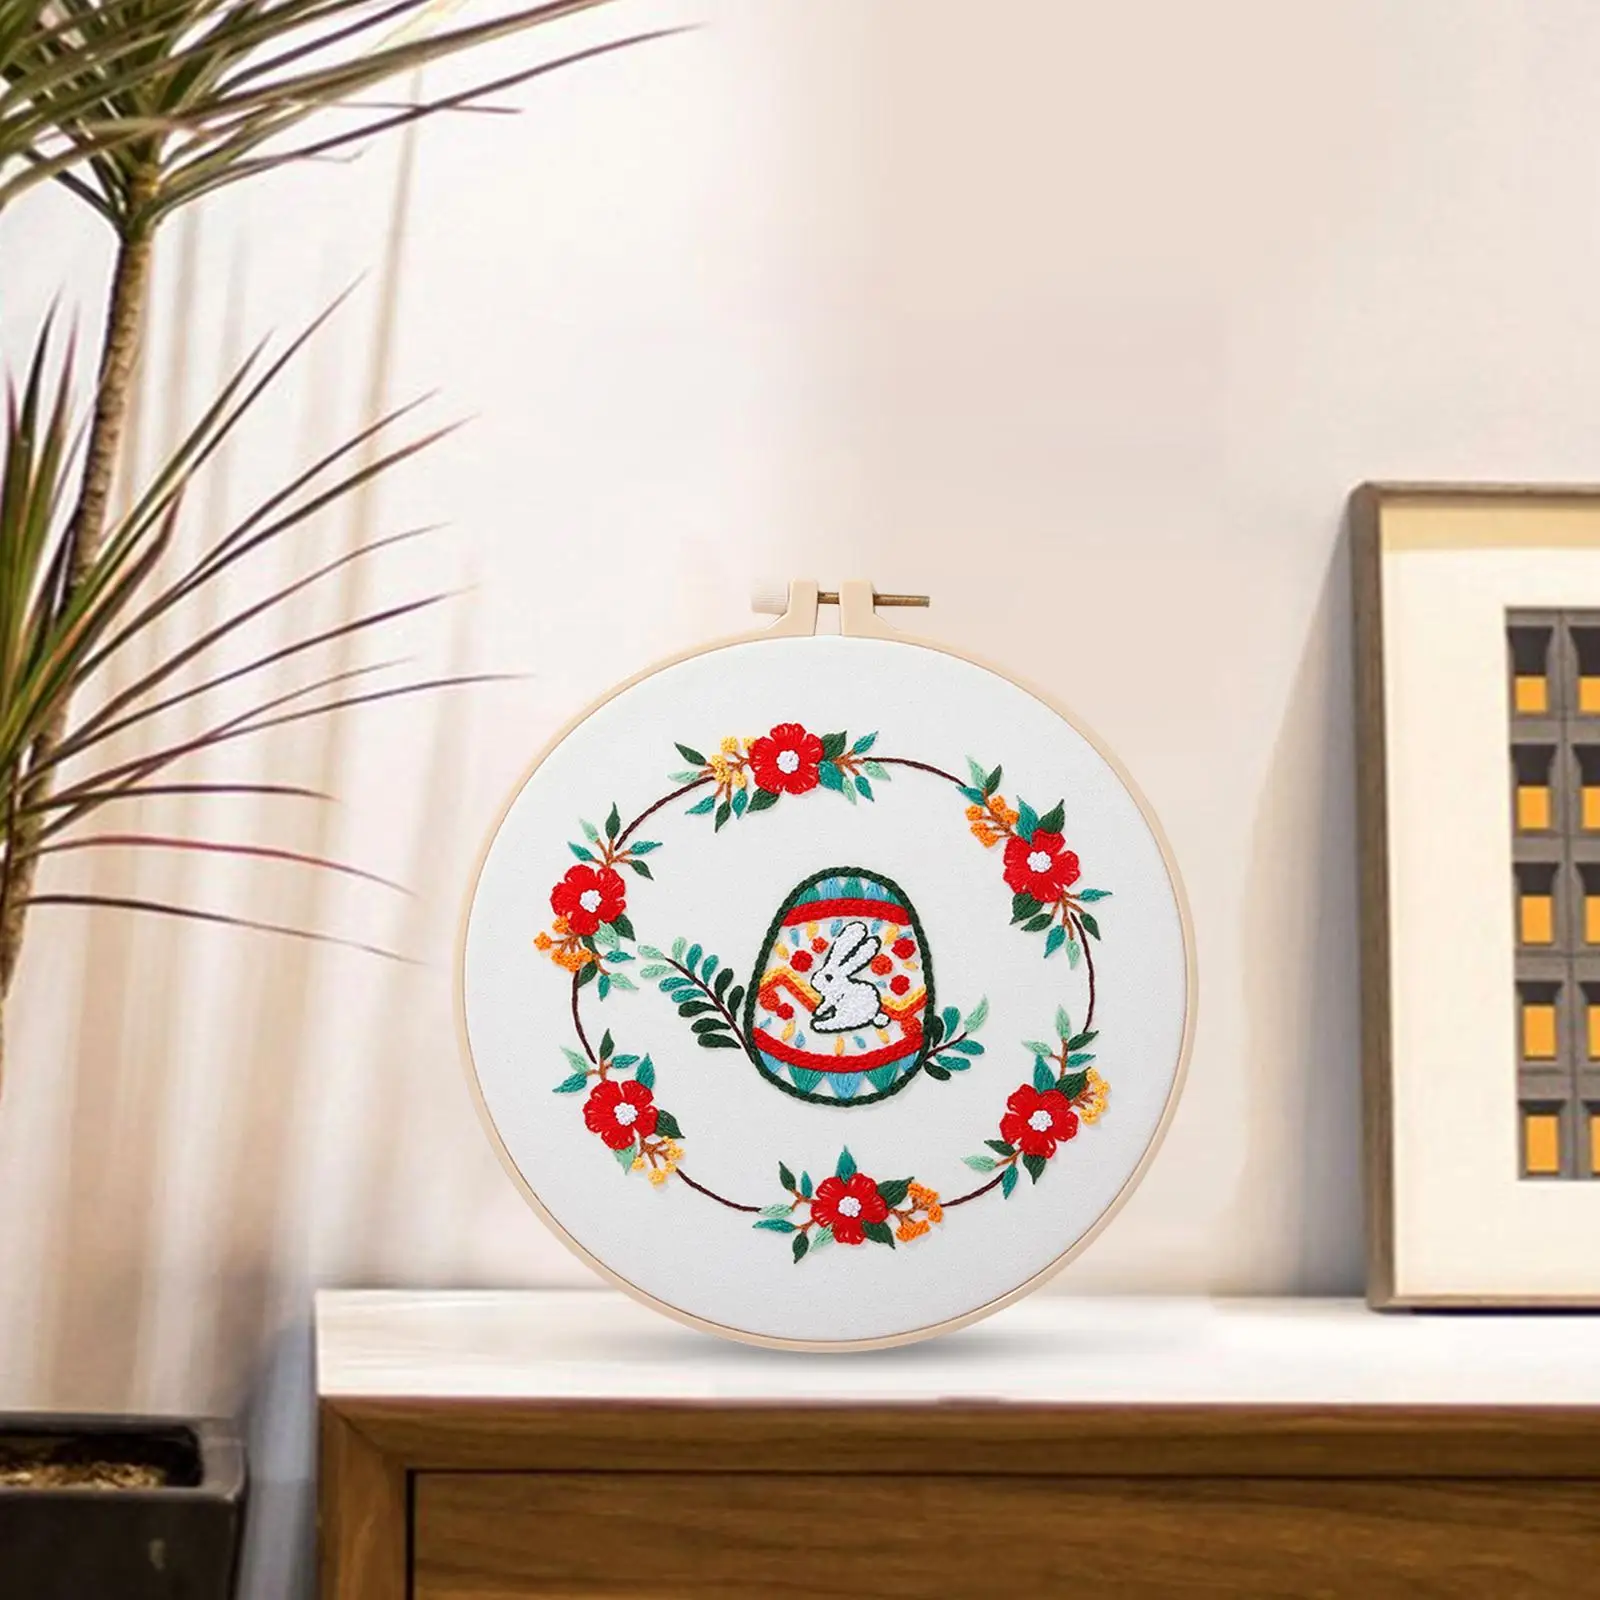 Rabbit Embroidery Starter, with Embroidery Hoop Beginners Sewing Cross Stitch Needlework Crafts for Home Decor